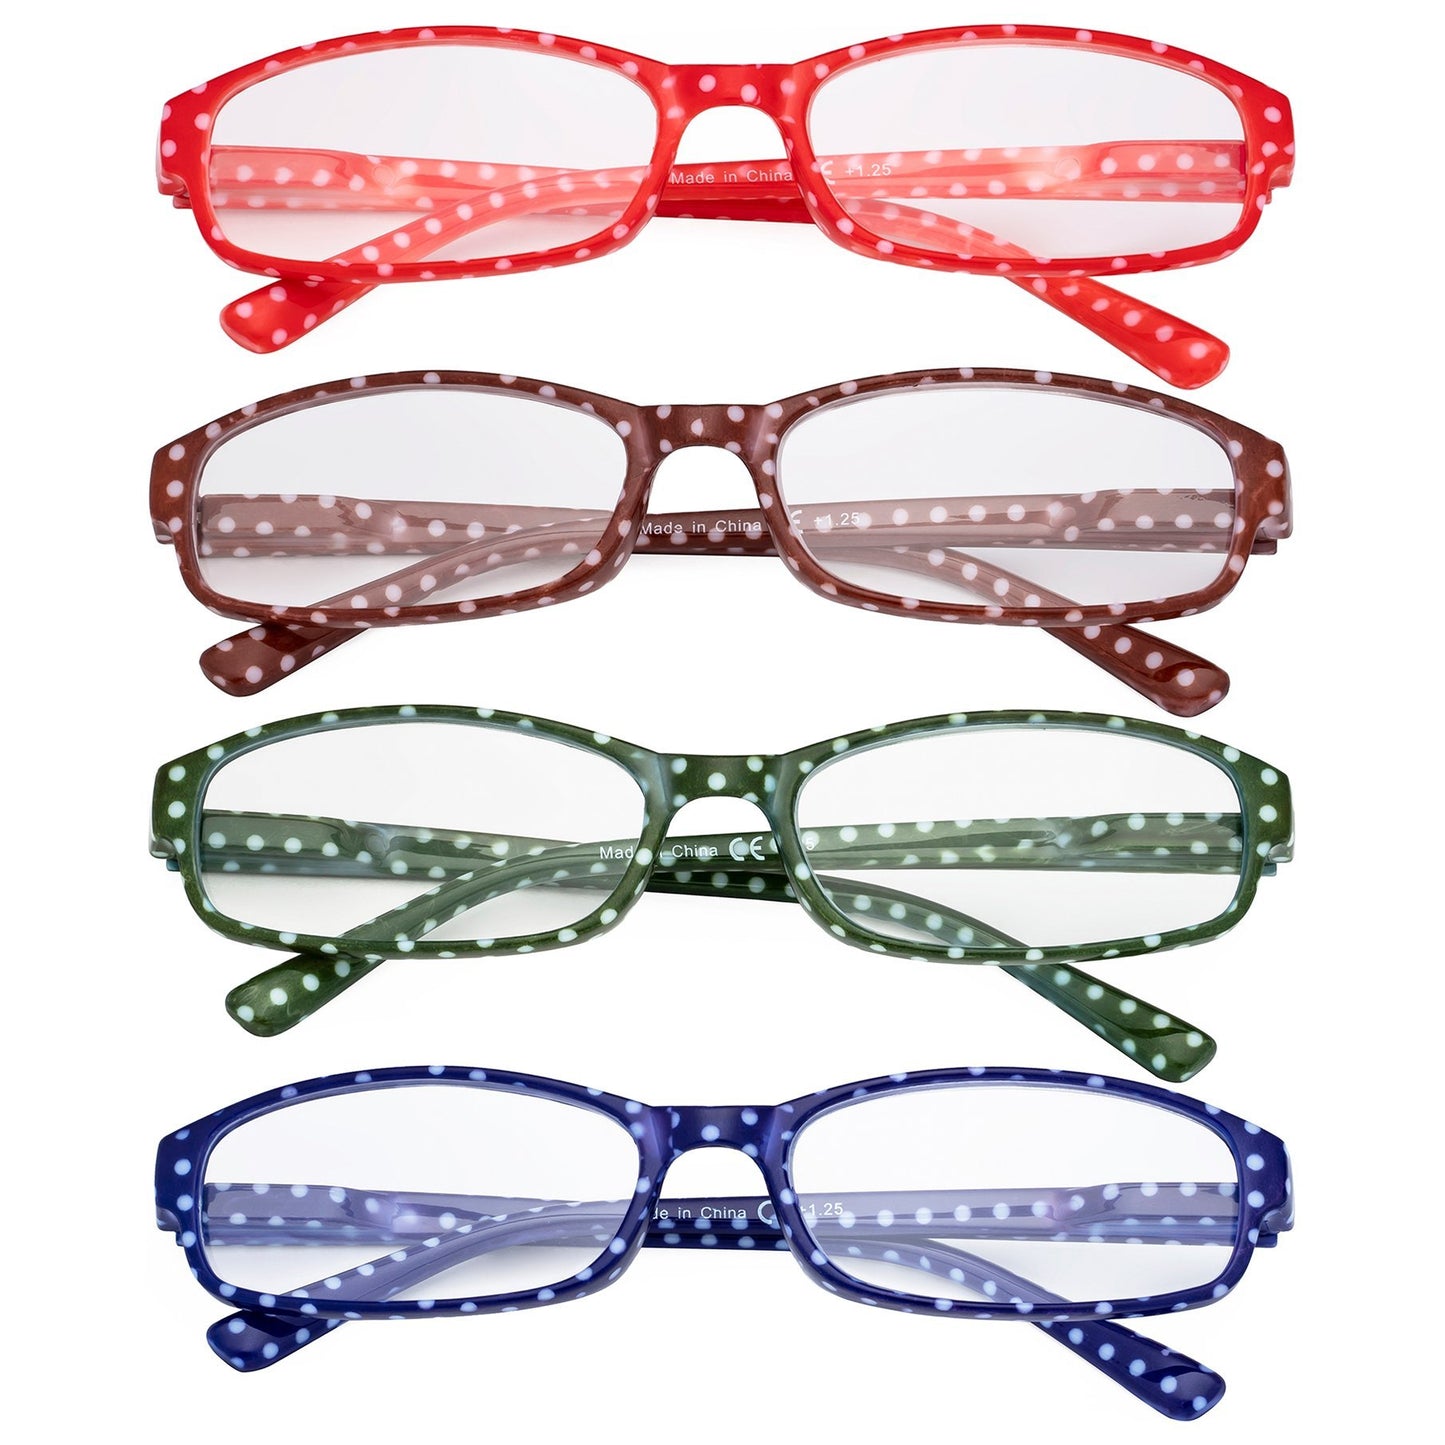 Small Lens Colorful Reading Glasses for Women R908PB